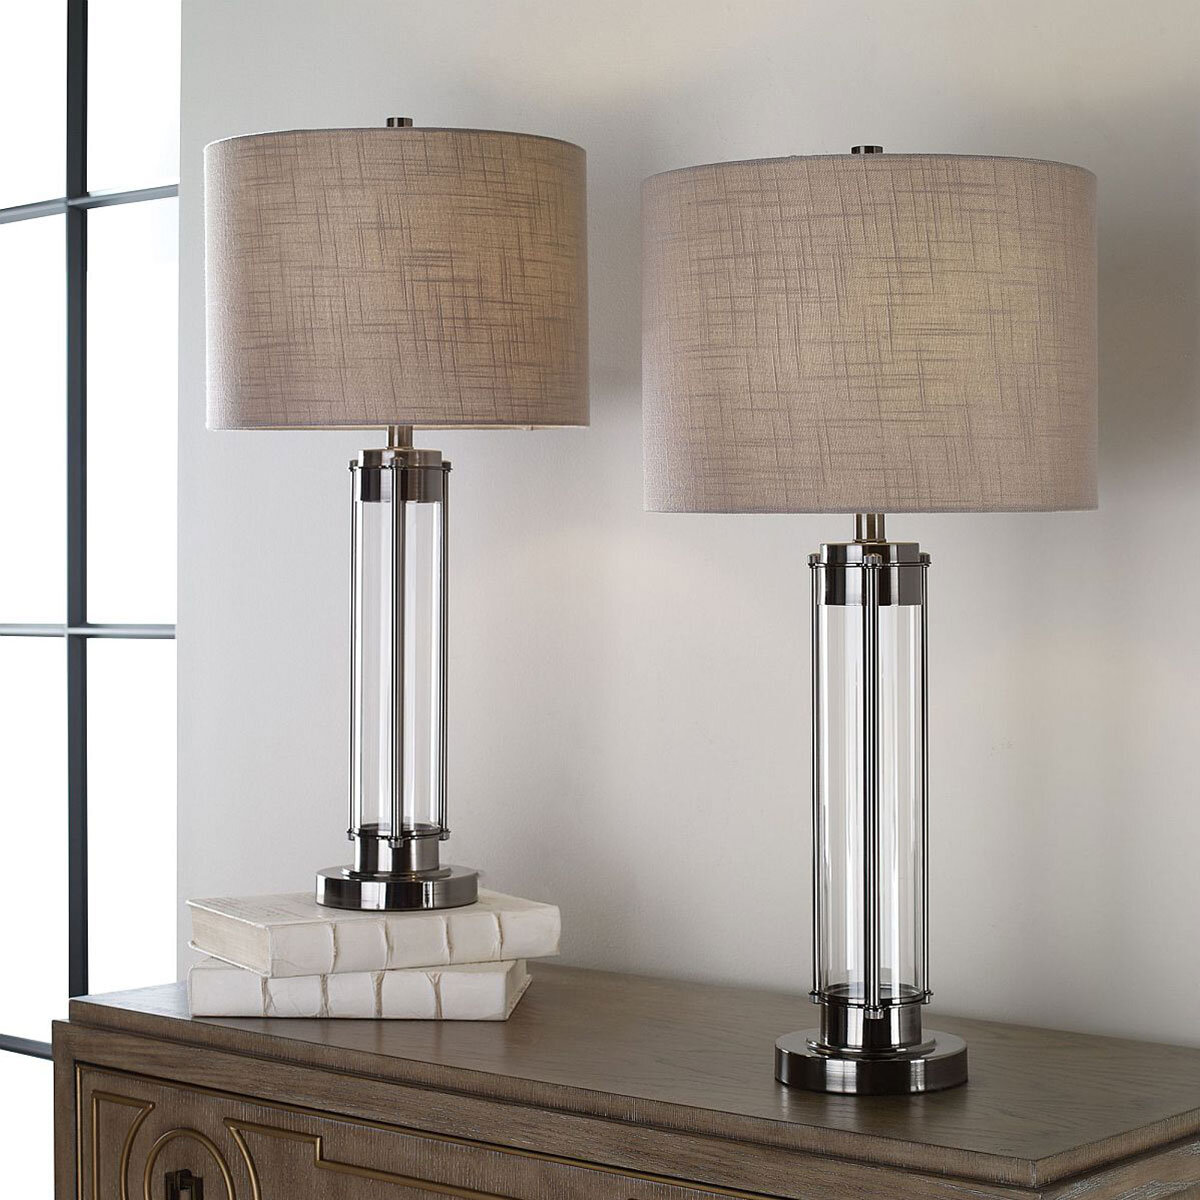 Lifestyle image of both lamps